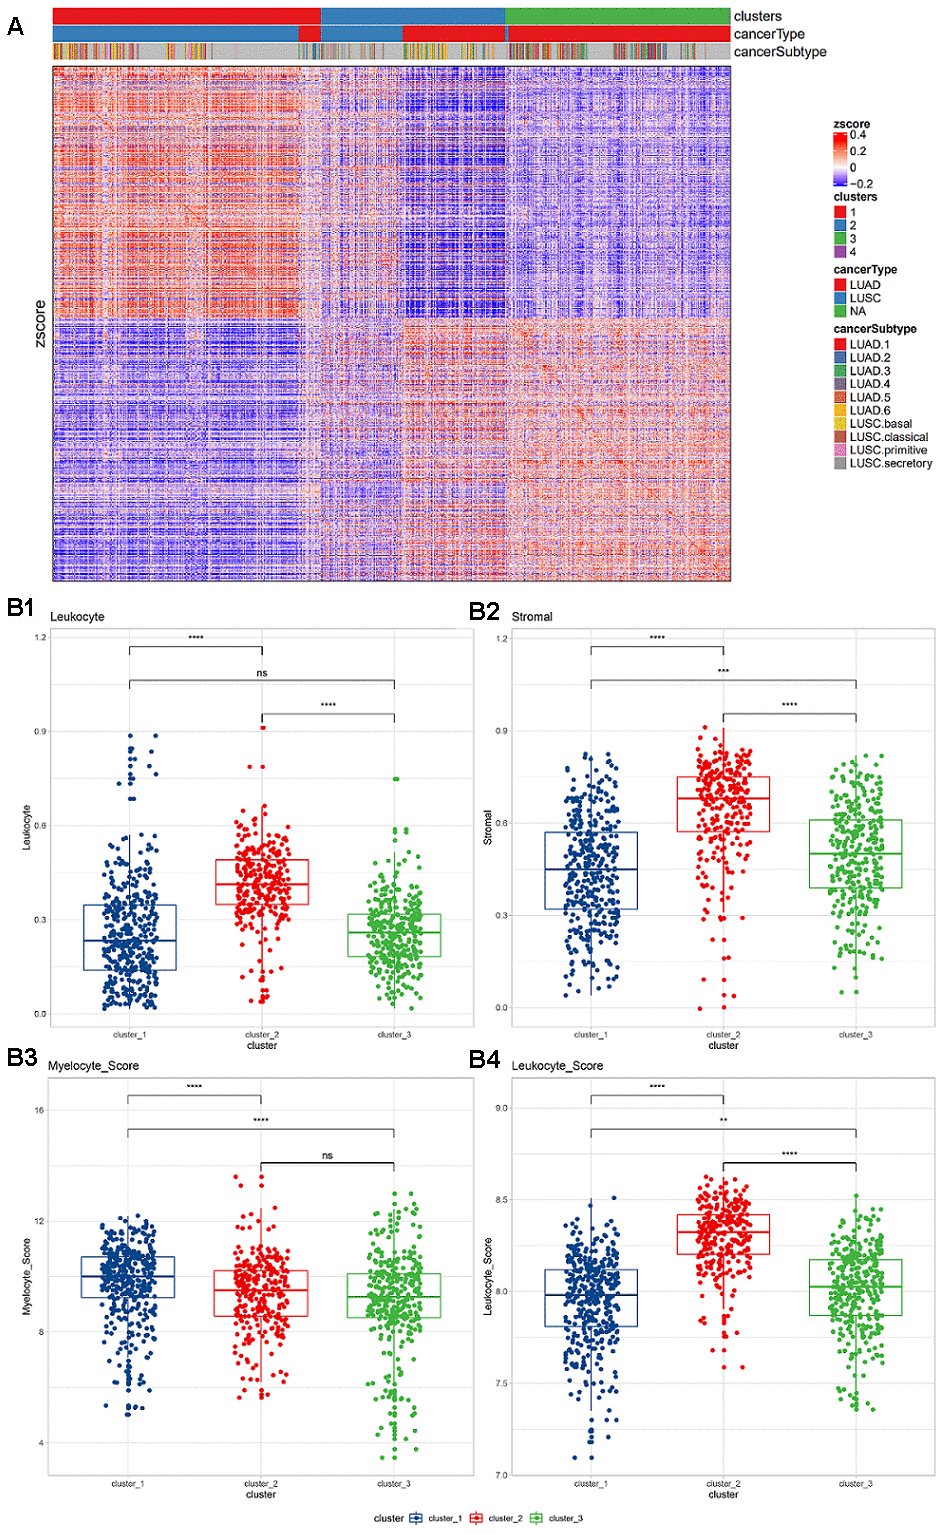 (A) Expression of immune-related genes in TCGA non-small cell lung cancer data. Pearson correlation distance and ward.D2 were used for unsupervised clustering. The top annotations represent the subgroups, cancer types, and TCGA cancer subtypes identified based on consistent clustering. (B) Lymphocyte and myeloid cell infiltration and stromal cell distribution among subgroups. (B1) Lymphocyte infiltration in different clusters; (B2) stromal cell distribution in different clusters; (B3) myelocyte infiltration score in different clusters; (B4) lymphocyte infiltration score in different clusters. The Wilcoxon rank-sum test (*, P